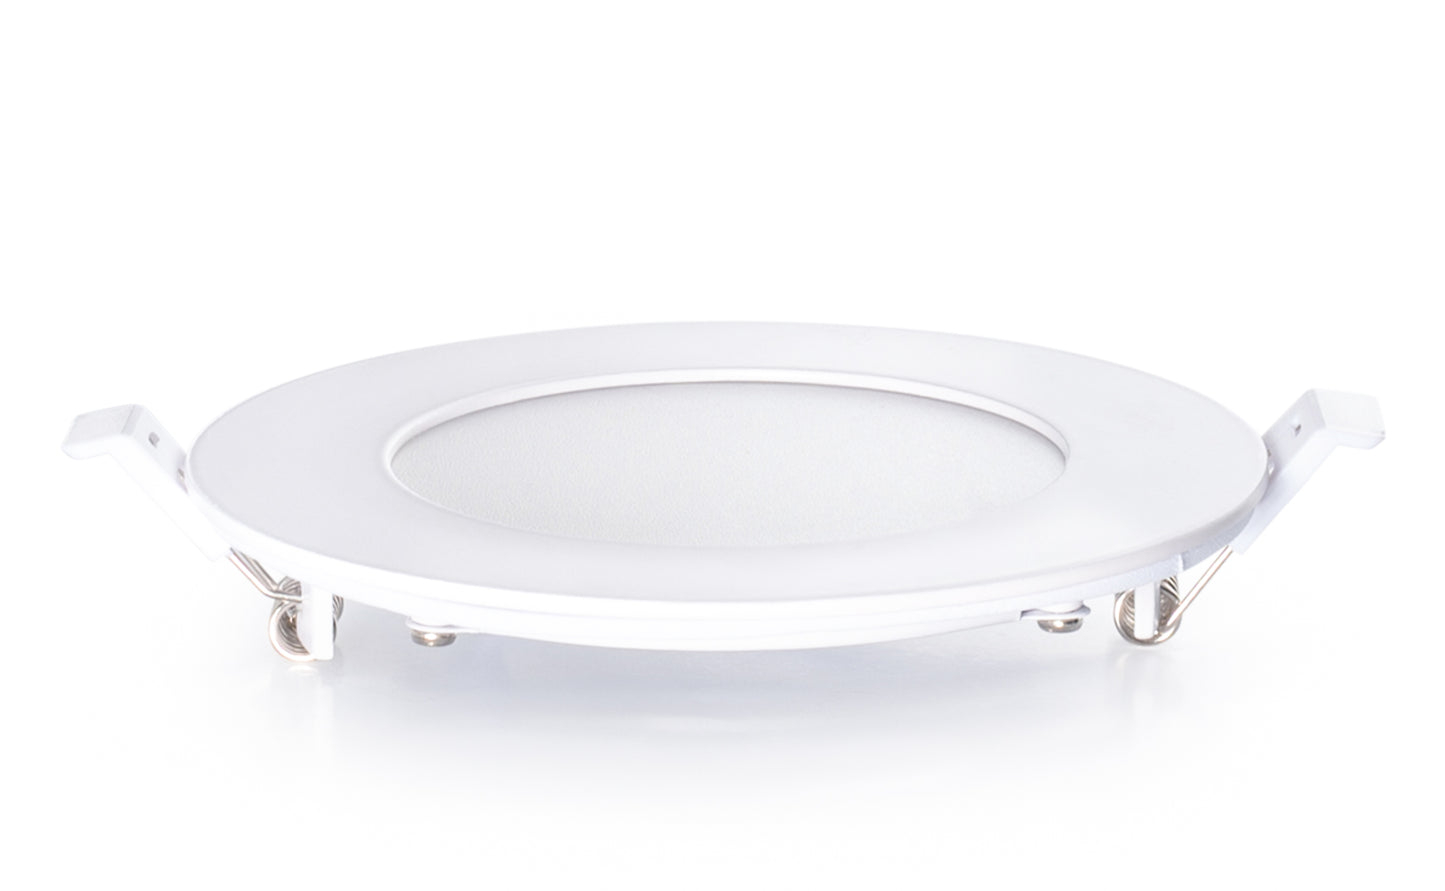 DirectLED 4 INCH LED ROUND RETROFIT - RECESSED LIGHT